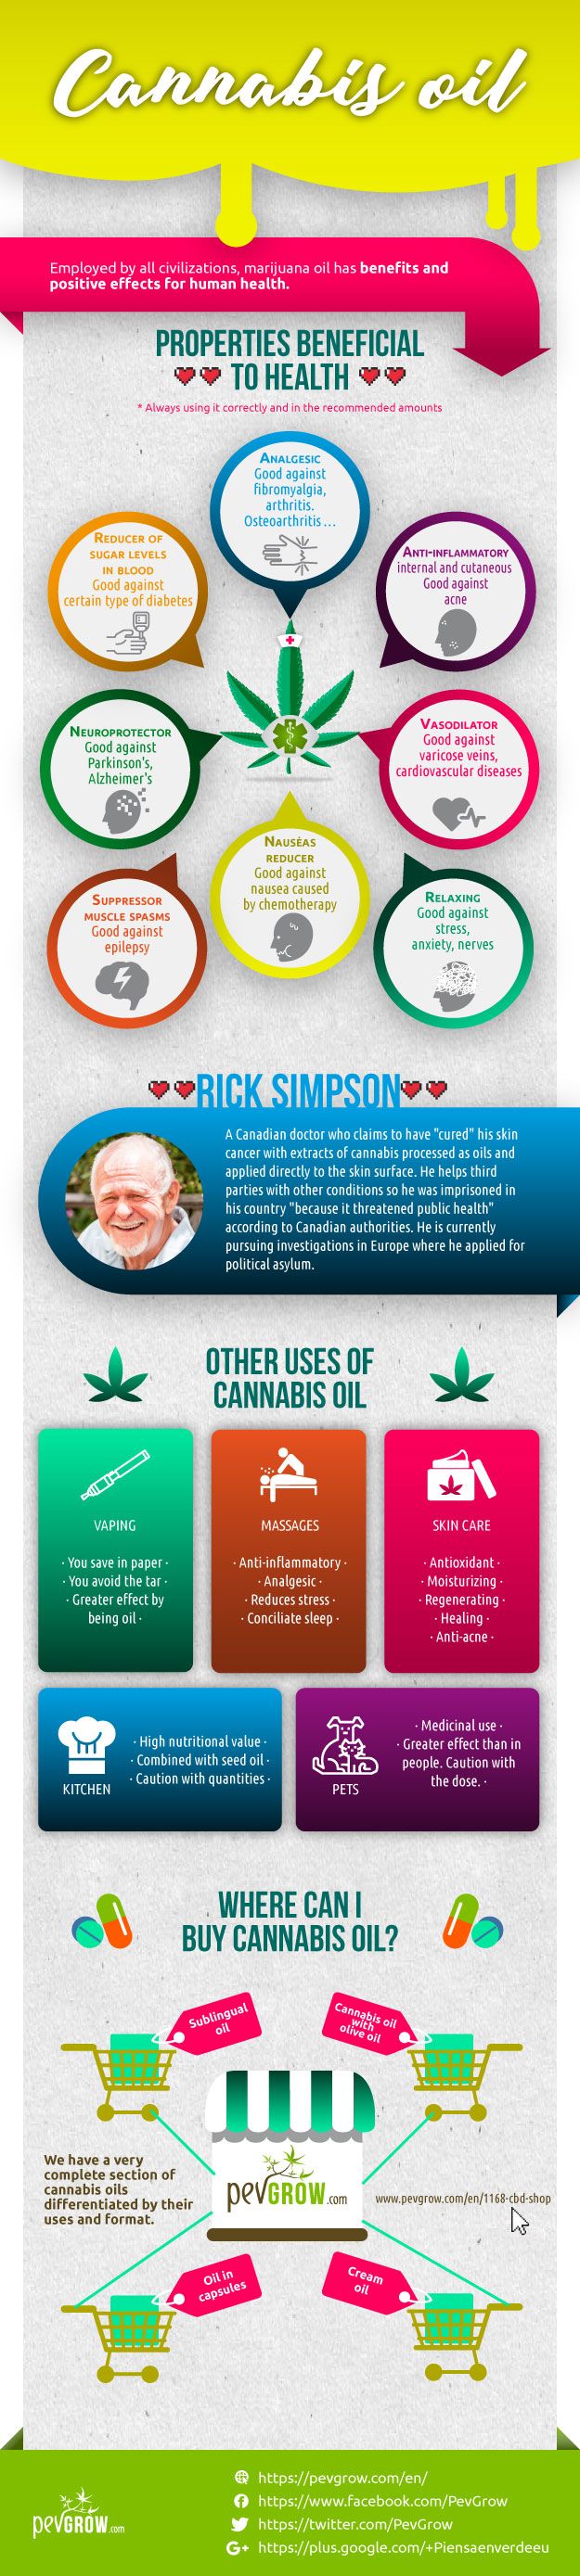 Infographics on the multiple benefits of cannabis oil